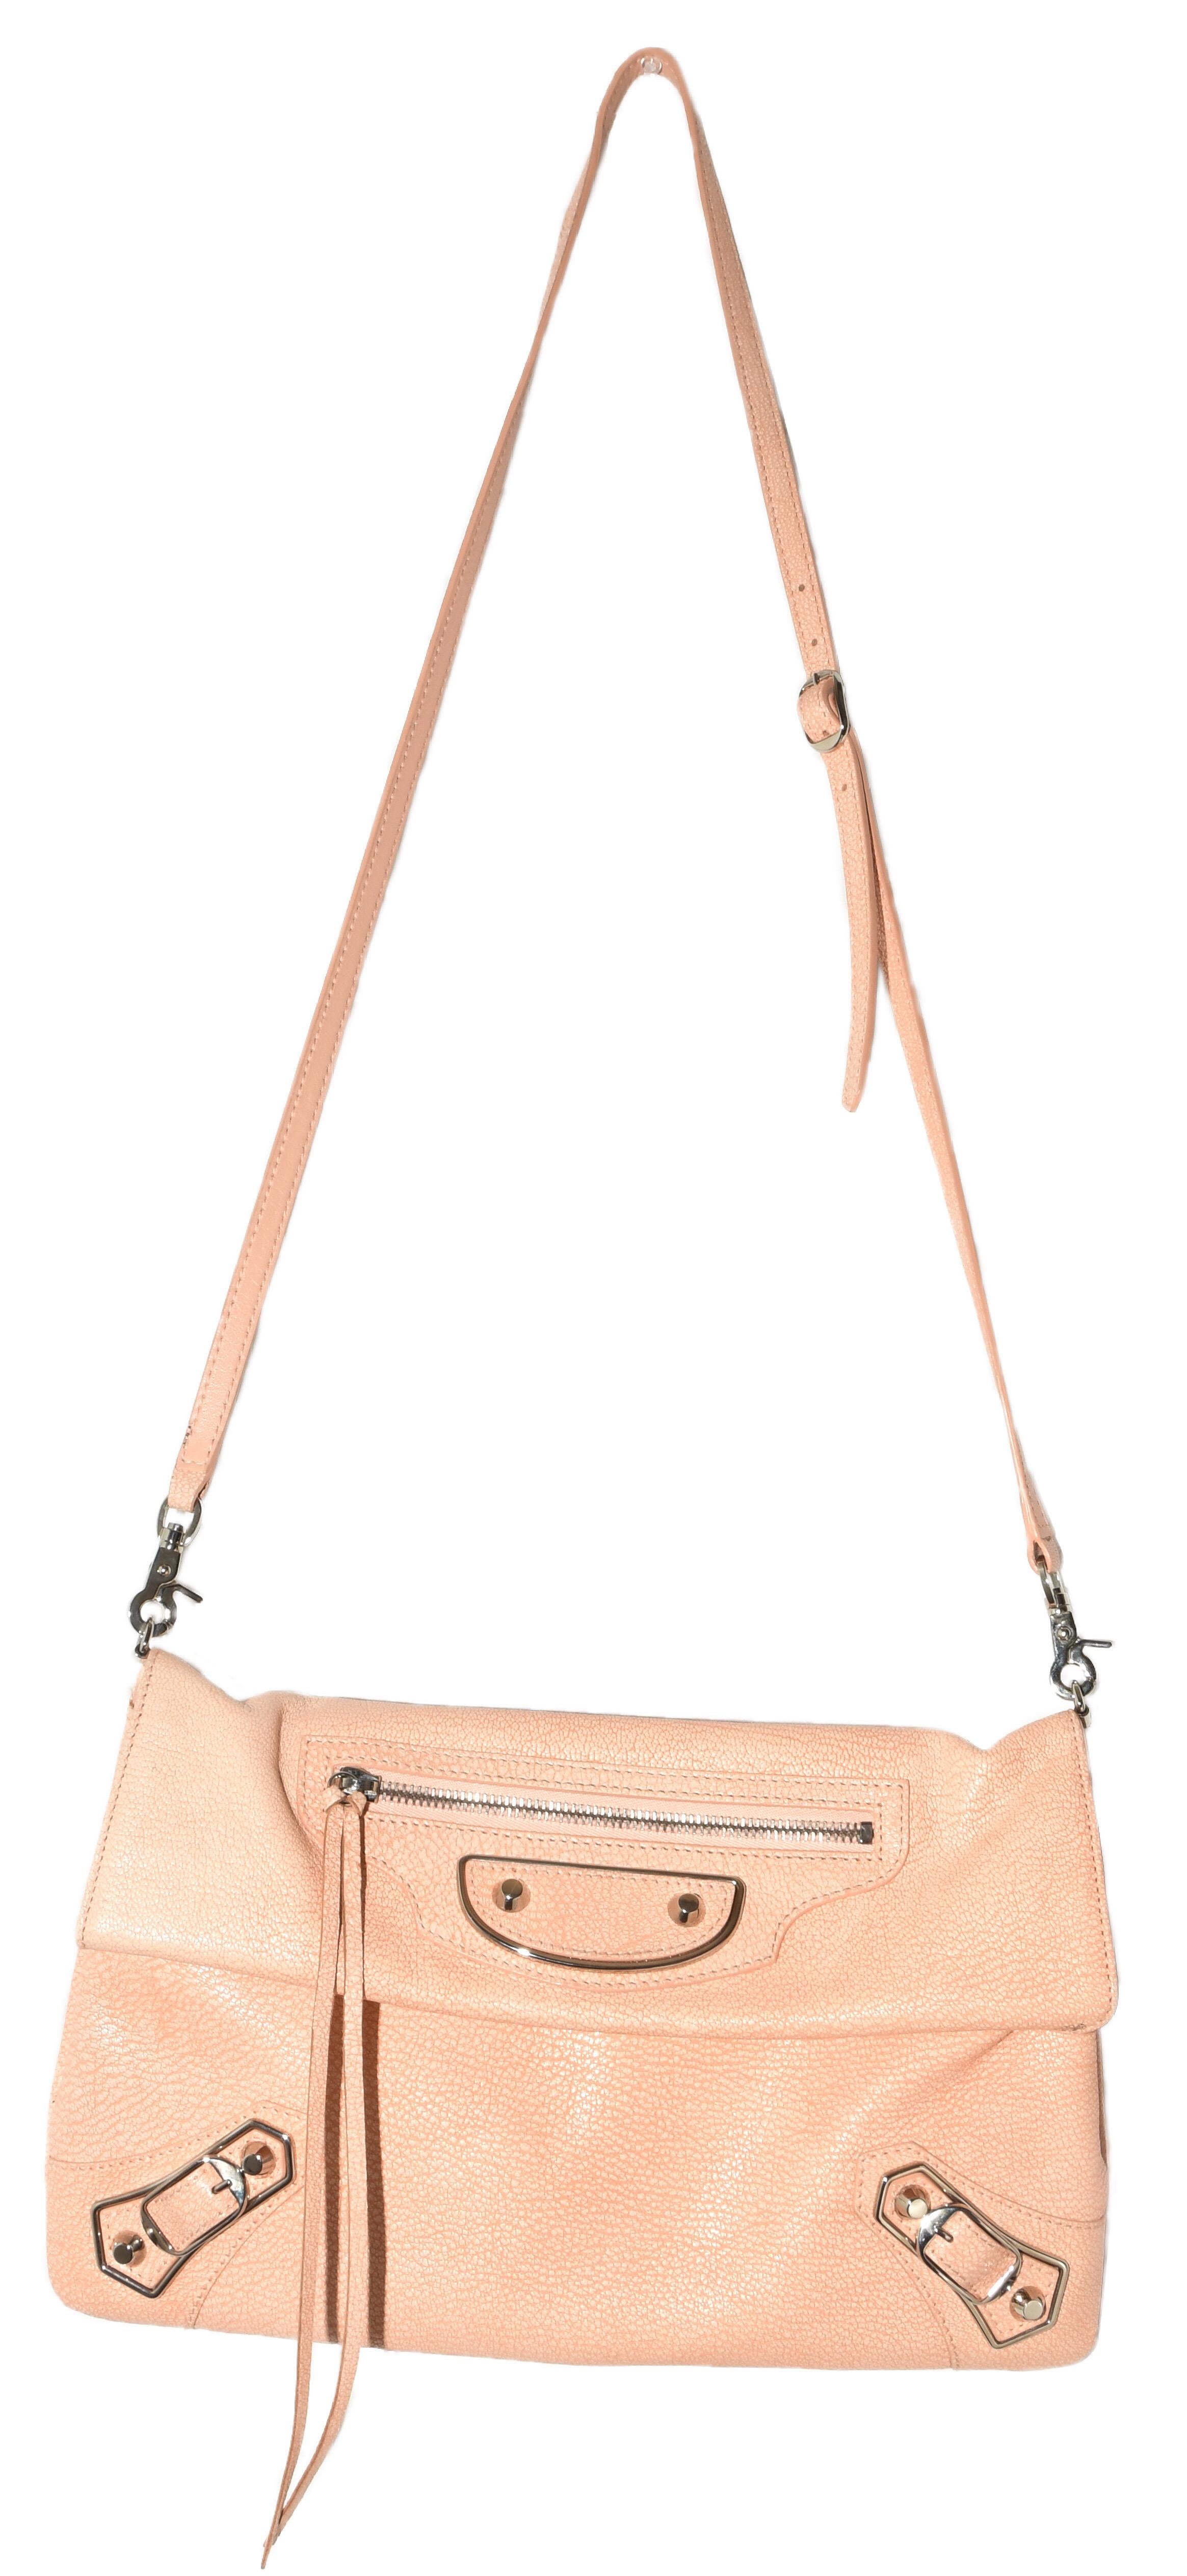 Balenciaga peach pebble leather City giant studs, features a removable shoulder strap.  An exterior front zip pocket at front, and rose gold-tone hardware.  Inside is a leather tag with a mirror.  This flap bag opens to a black fabric interior with